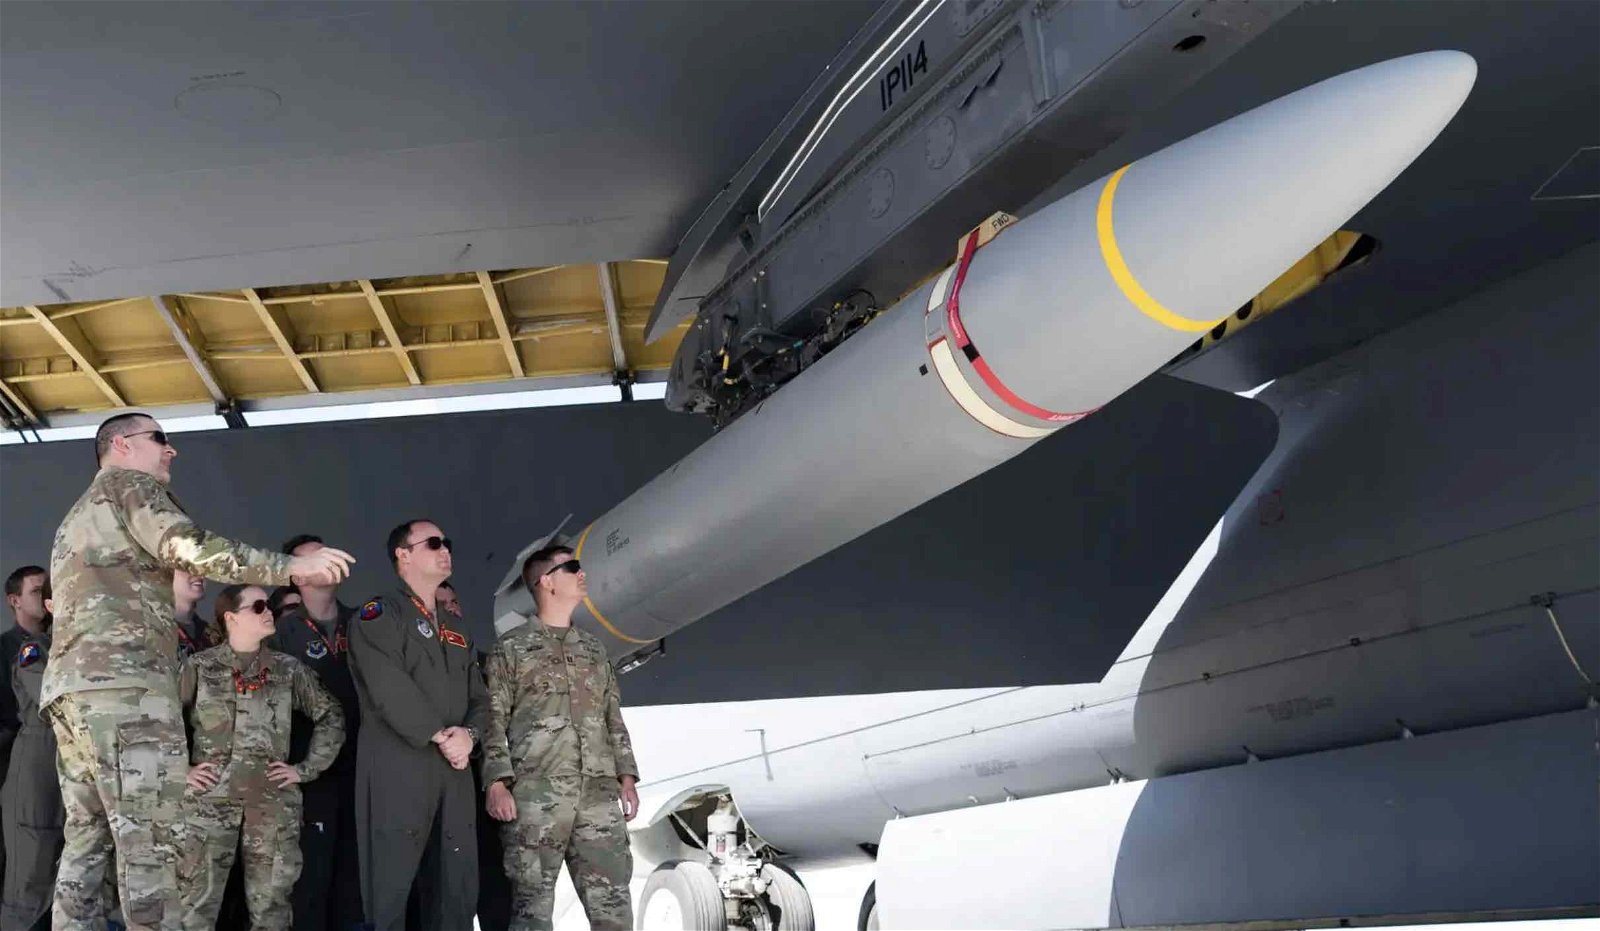 AGM-183A Hypersonic Missile seen prior to a test that occurred over the Marshall Islands on Sunday (USAF).